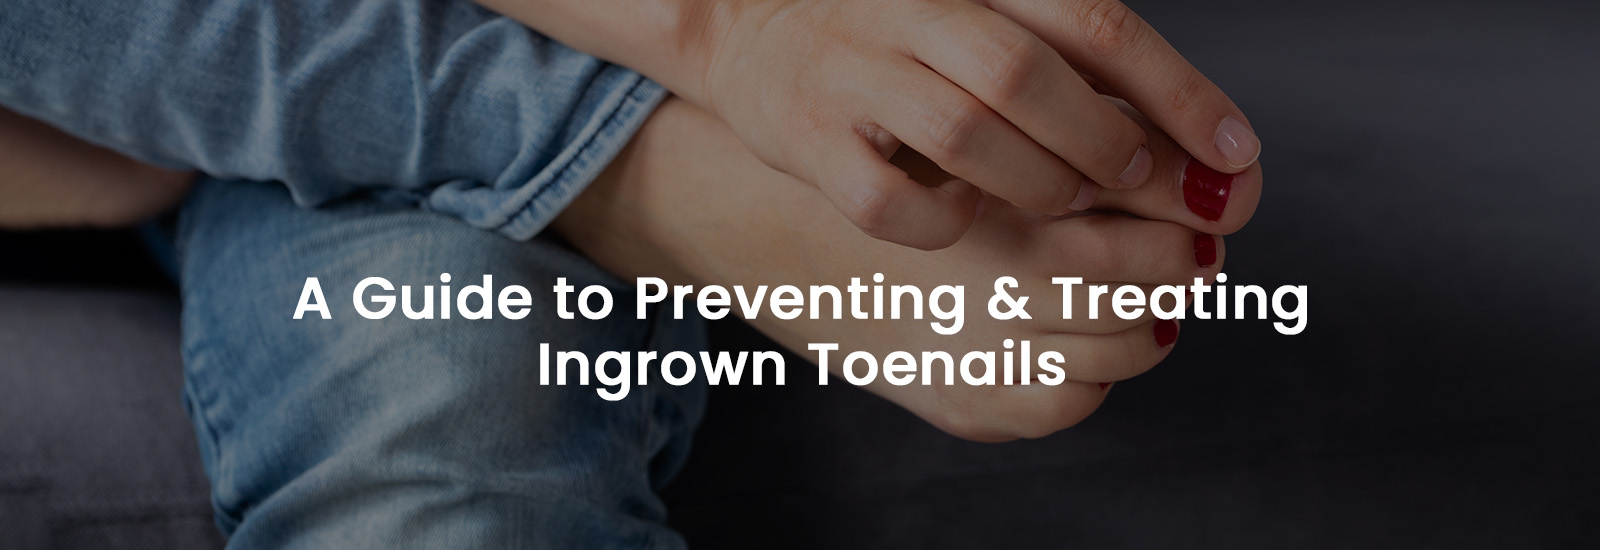 A Guide to Preventing & Treating Ingrown Toenails | Banner Image